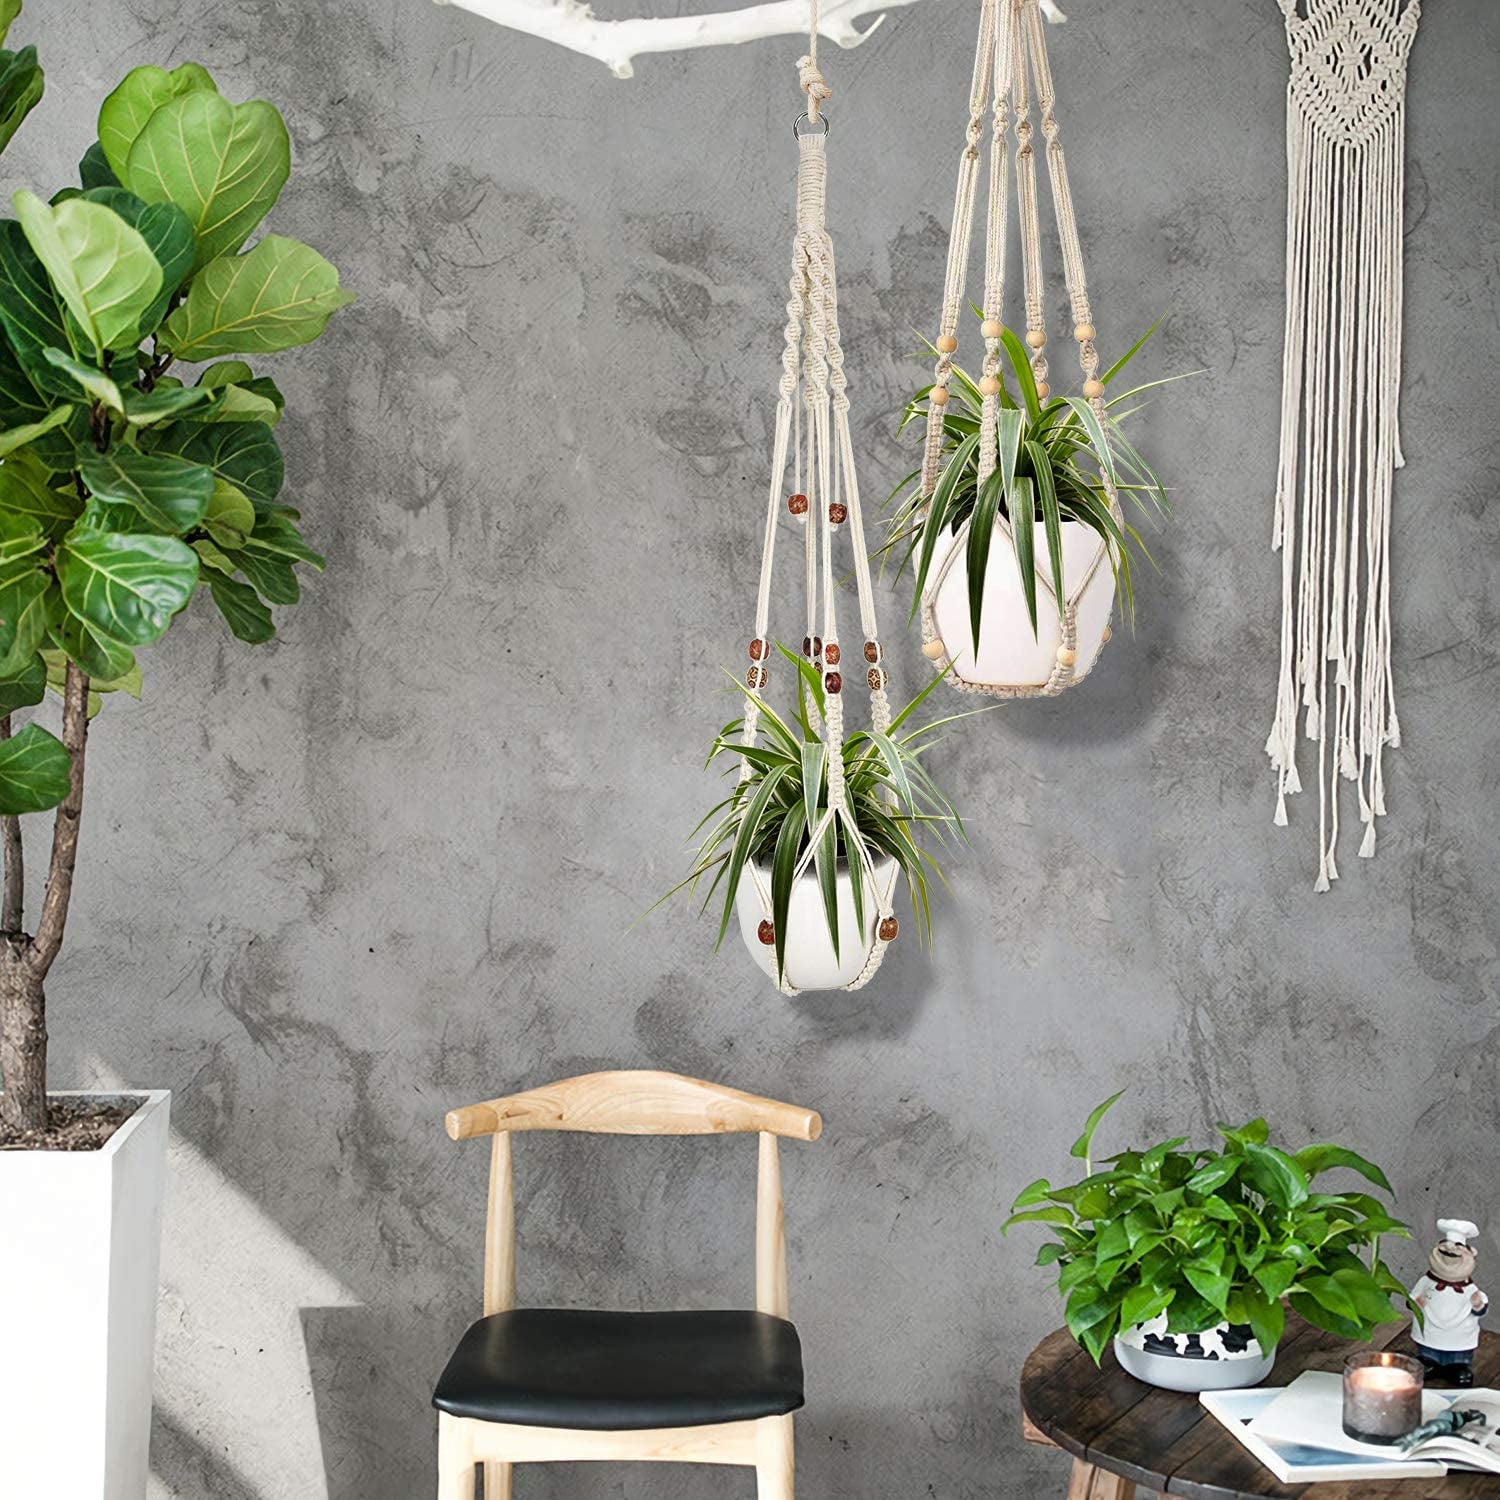 2 Packs Macrame Plant Hangers, Indoor Hanging Planter Basket with Wood Beads Decorative Macrame Pot Hanger for Home Decor with 4 Hooks